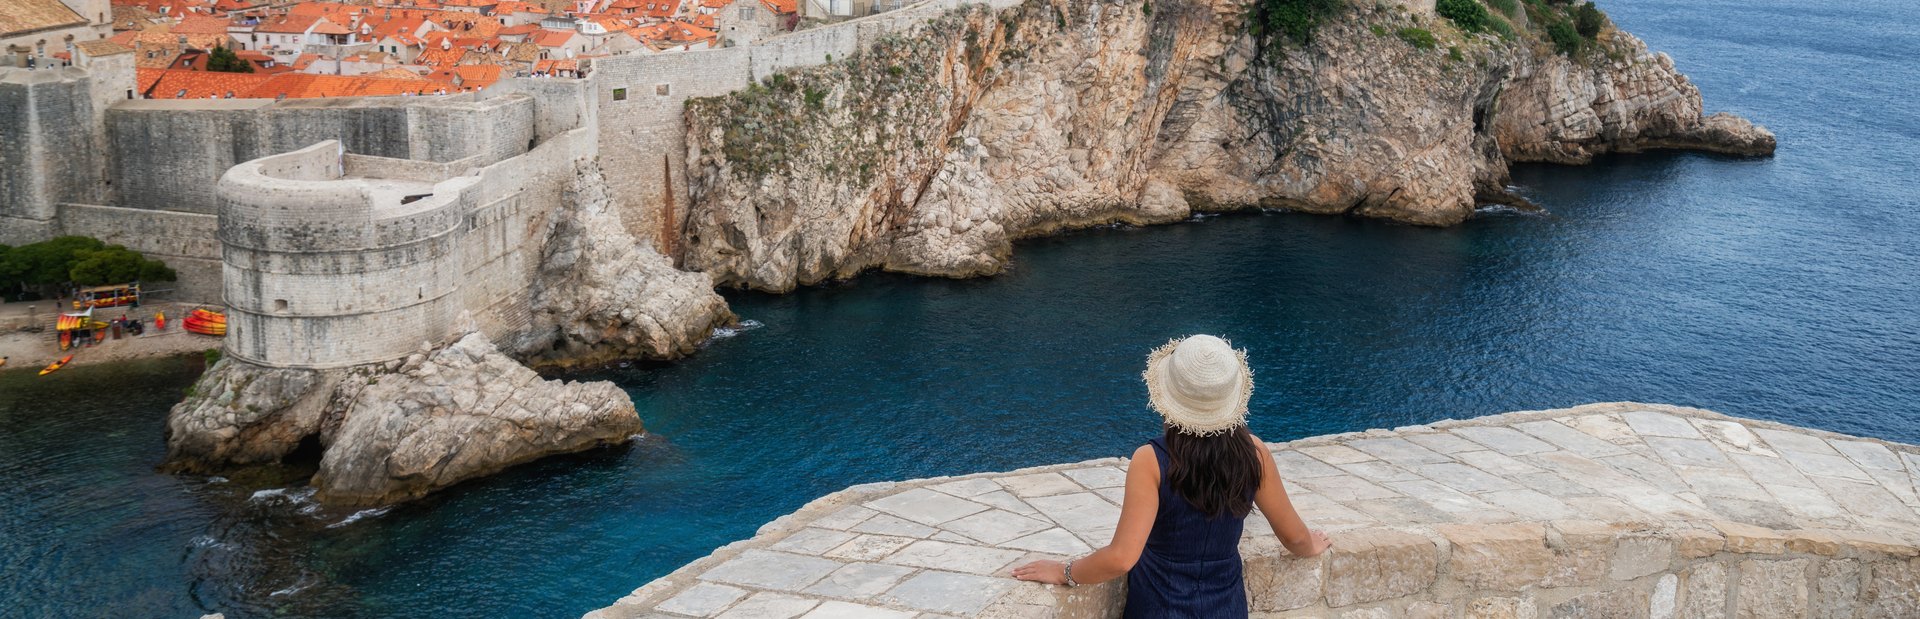 Discover Croatia’s UNESCO World Heritage Sites by superyacht